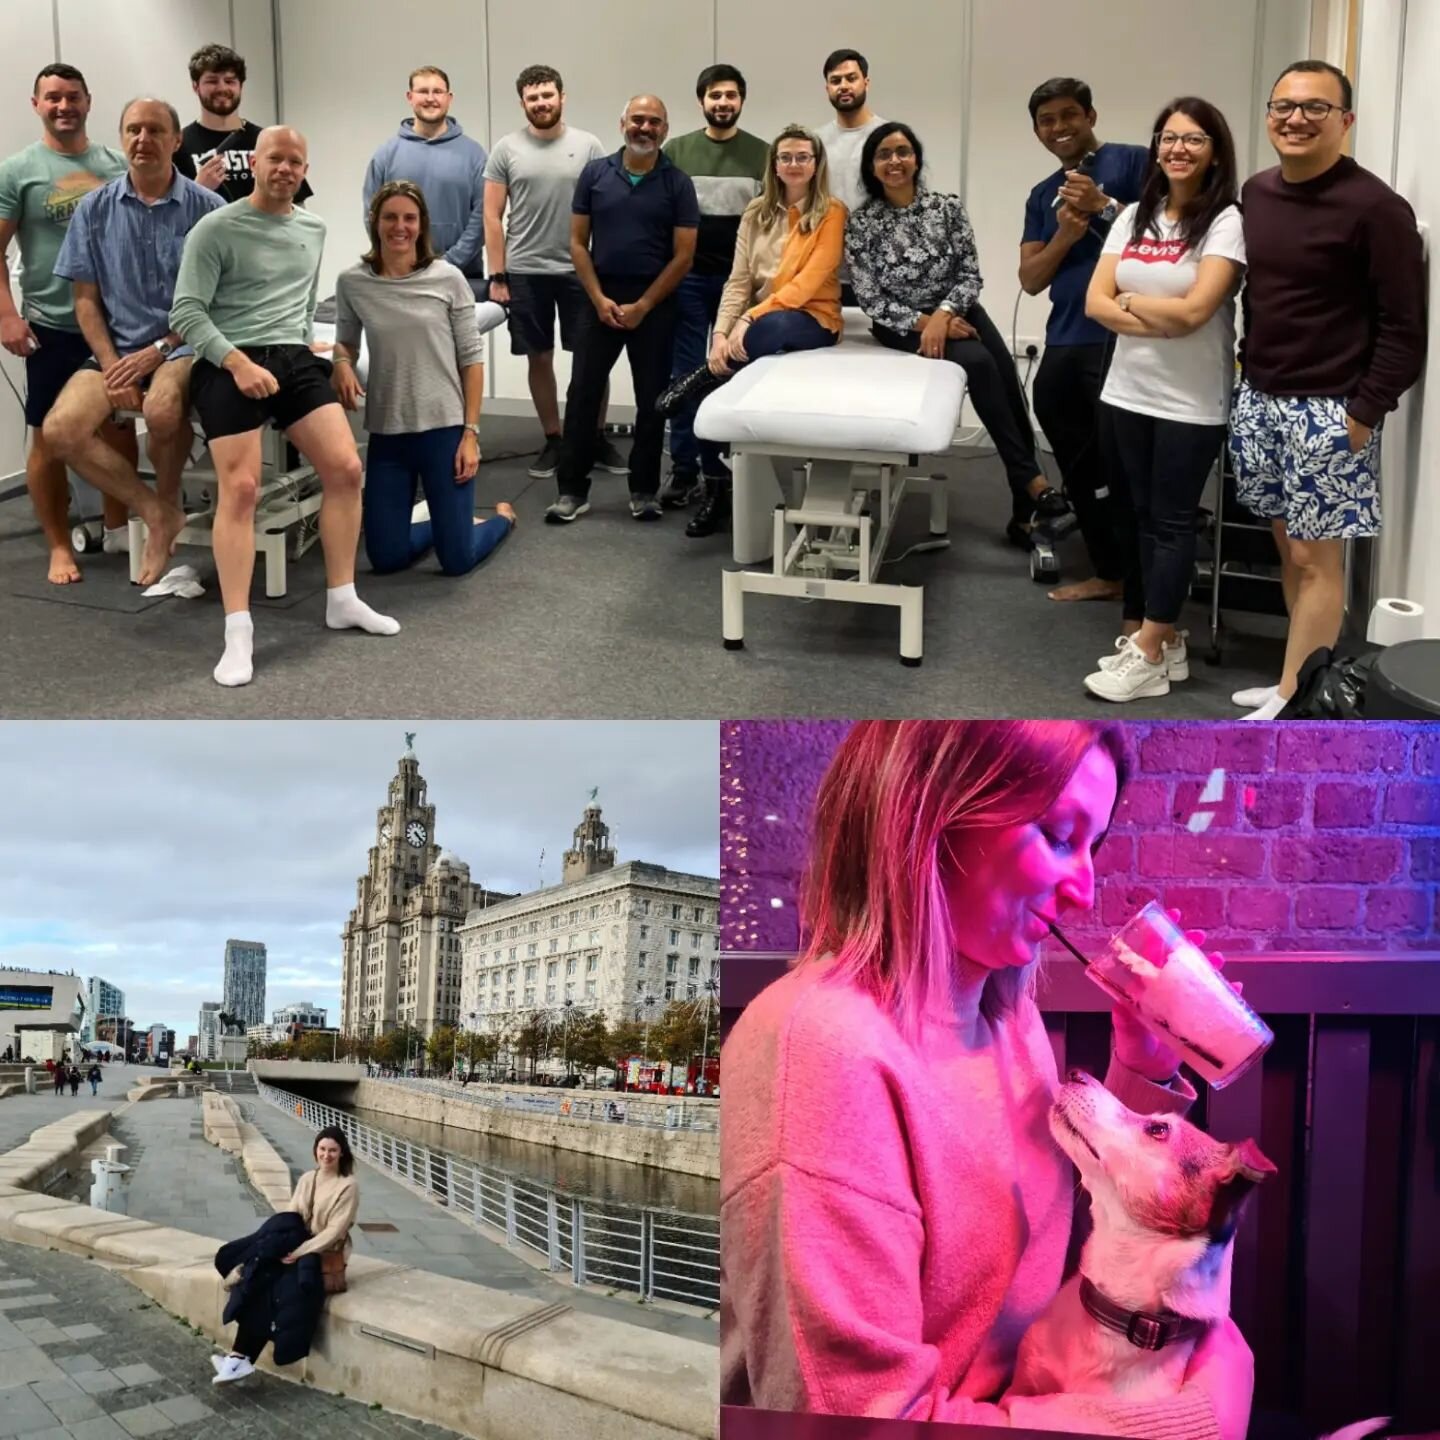 Excellent weekend in Liverpool with @vennhealthcare providing some superb training on Radial Shockwave Therapy. Great to meet colleagues from around the UK and beyond and get further into the weeds on this game-changing technology. Looking forward to